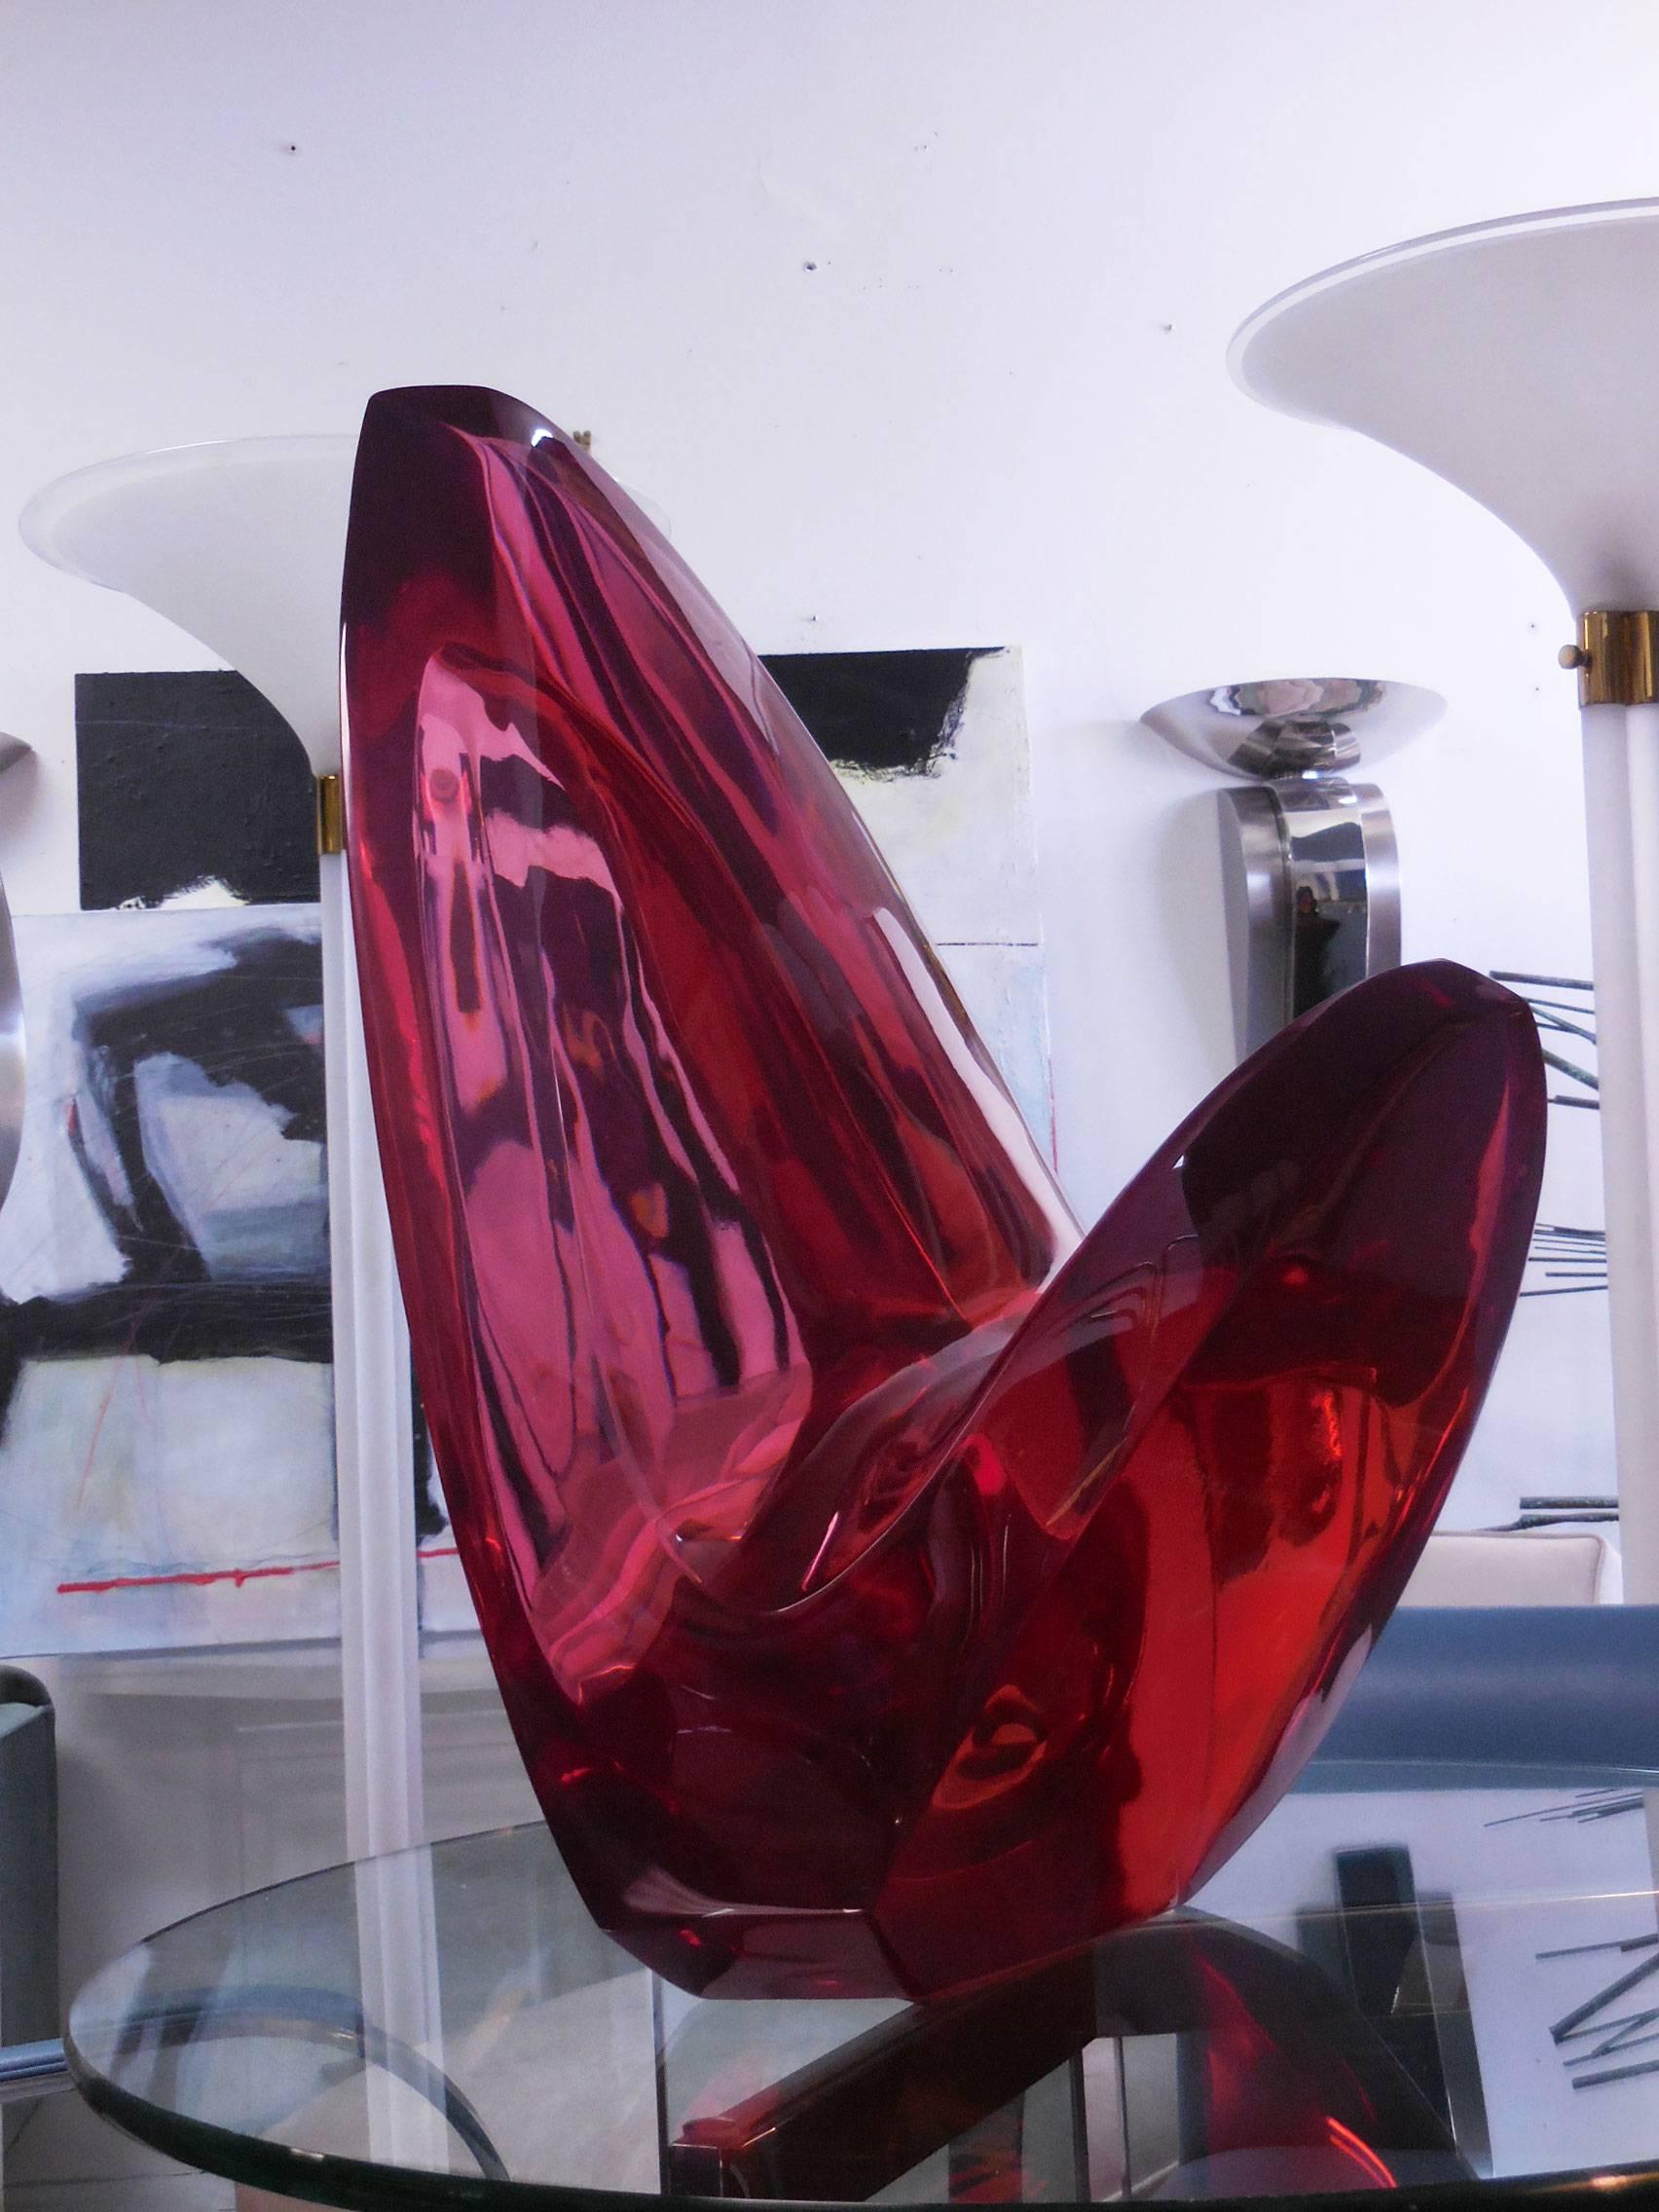 Bold modern abstract sculpture by Louis Von Koelnau. Stunning design that can be enjoyed from every angle. Done in 1986, number 16 of 24. Fully signed on bottom.